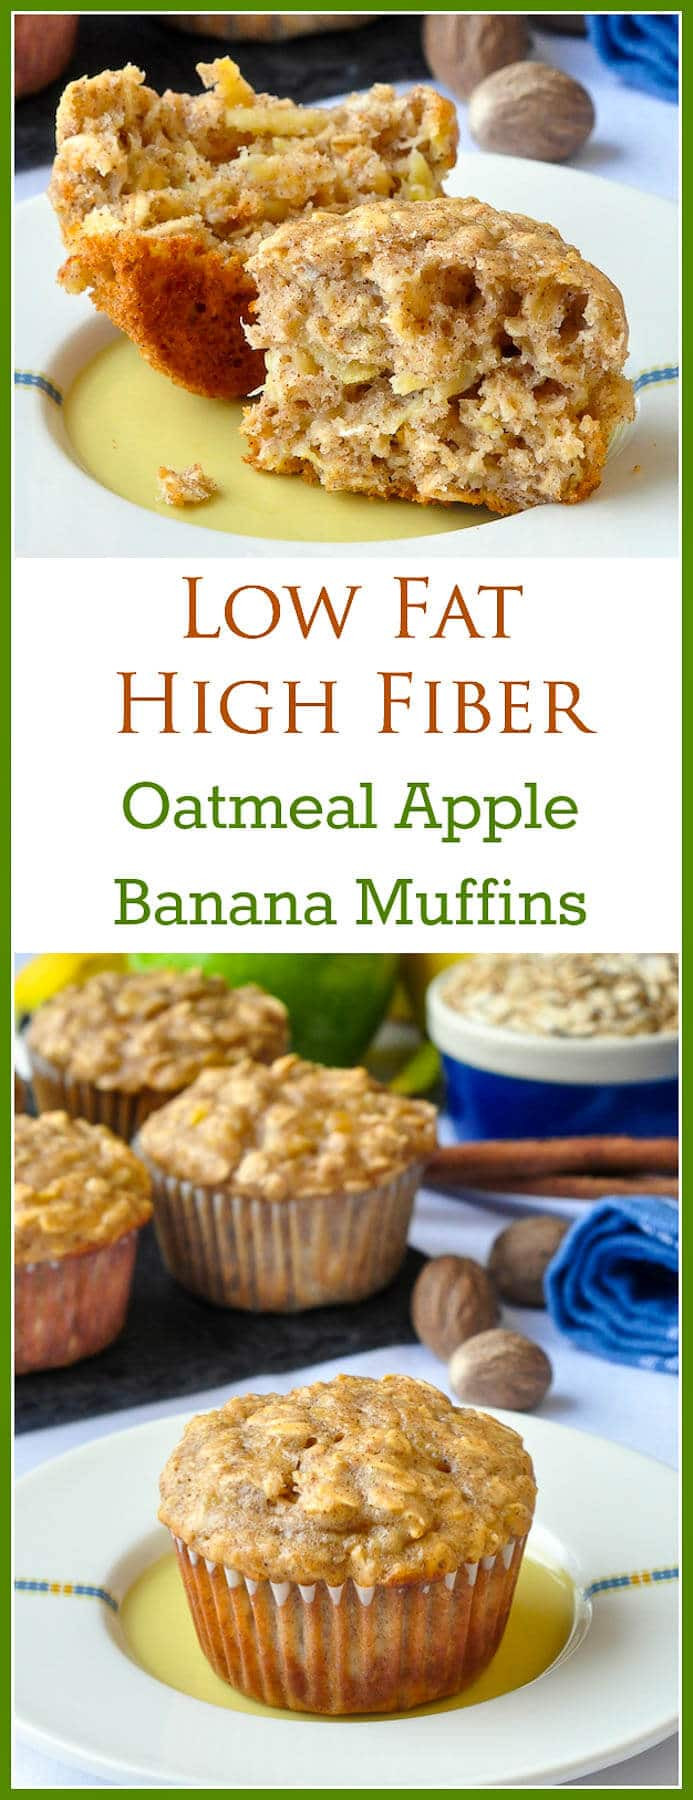 High Fiber Muffin Recipes Best Of Oatmeal Apple Banana Low Fat Muffins Easy Delicious